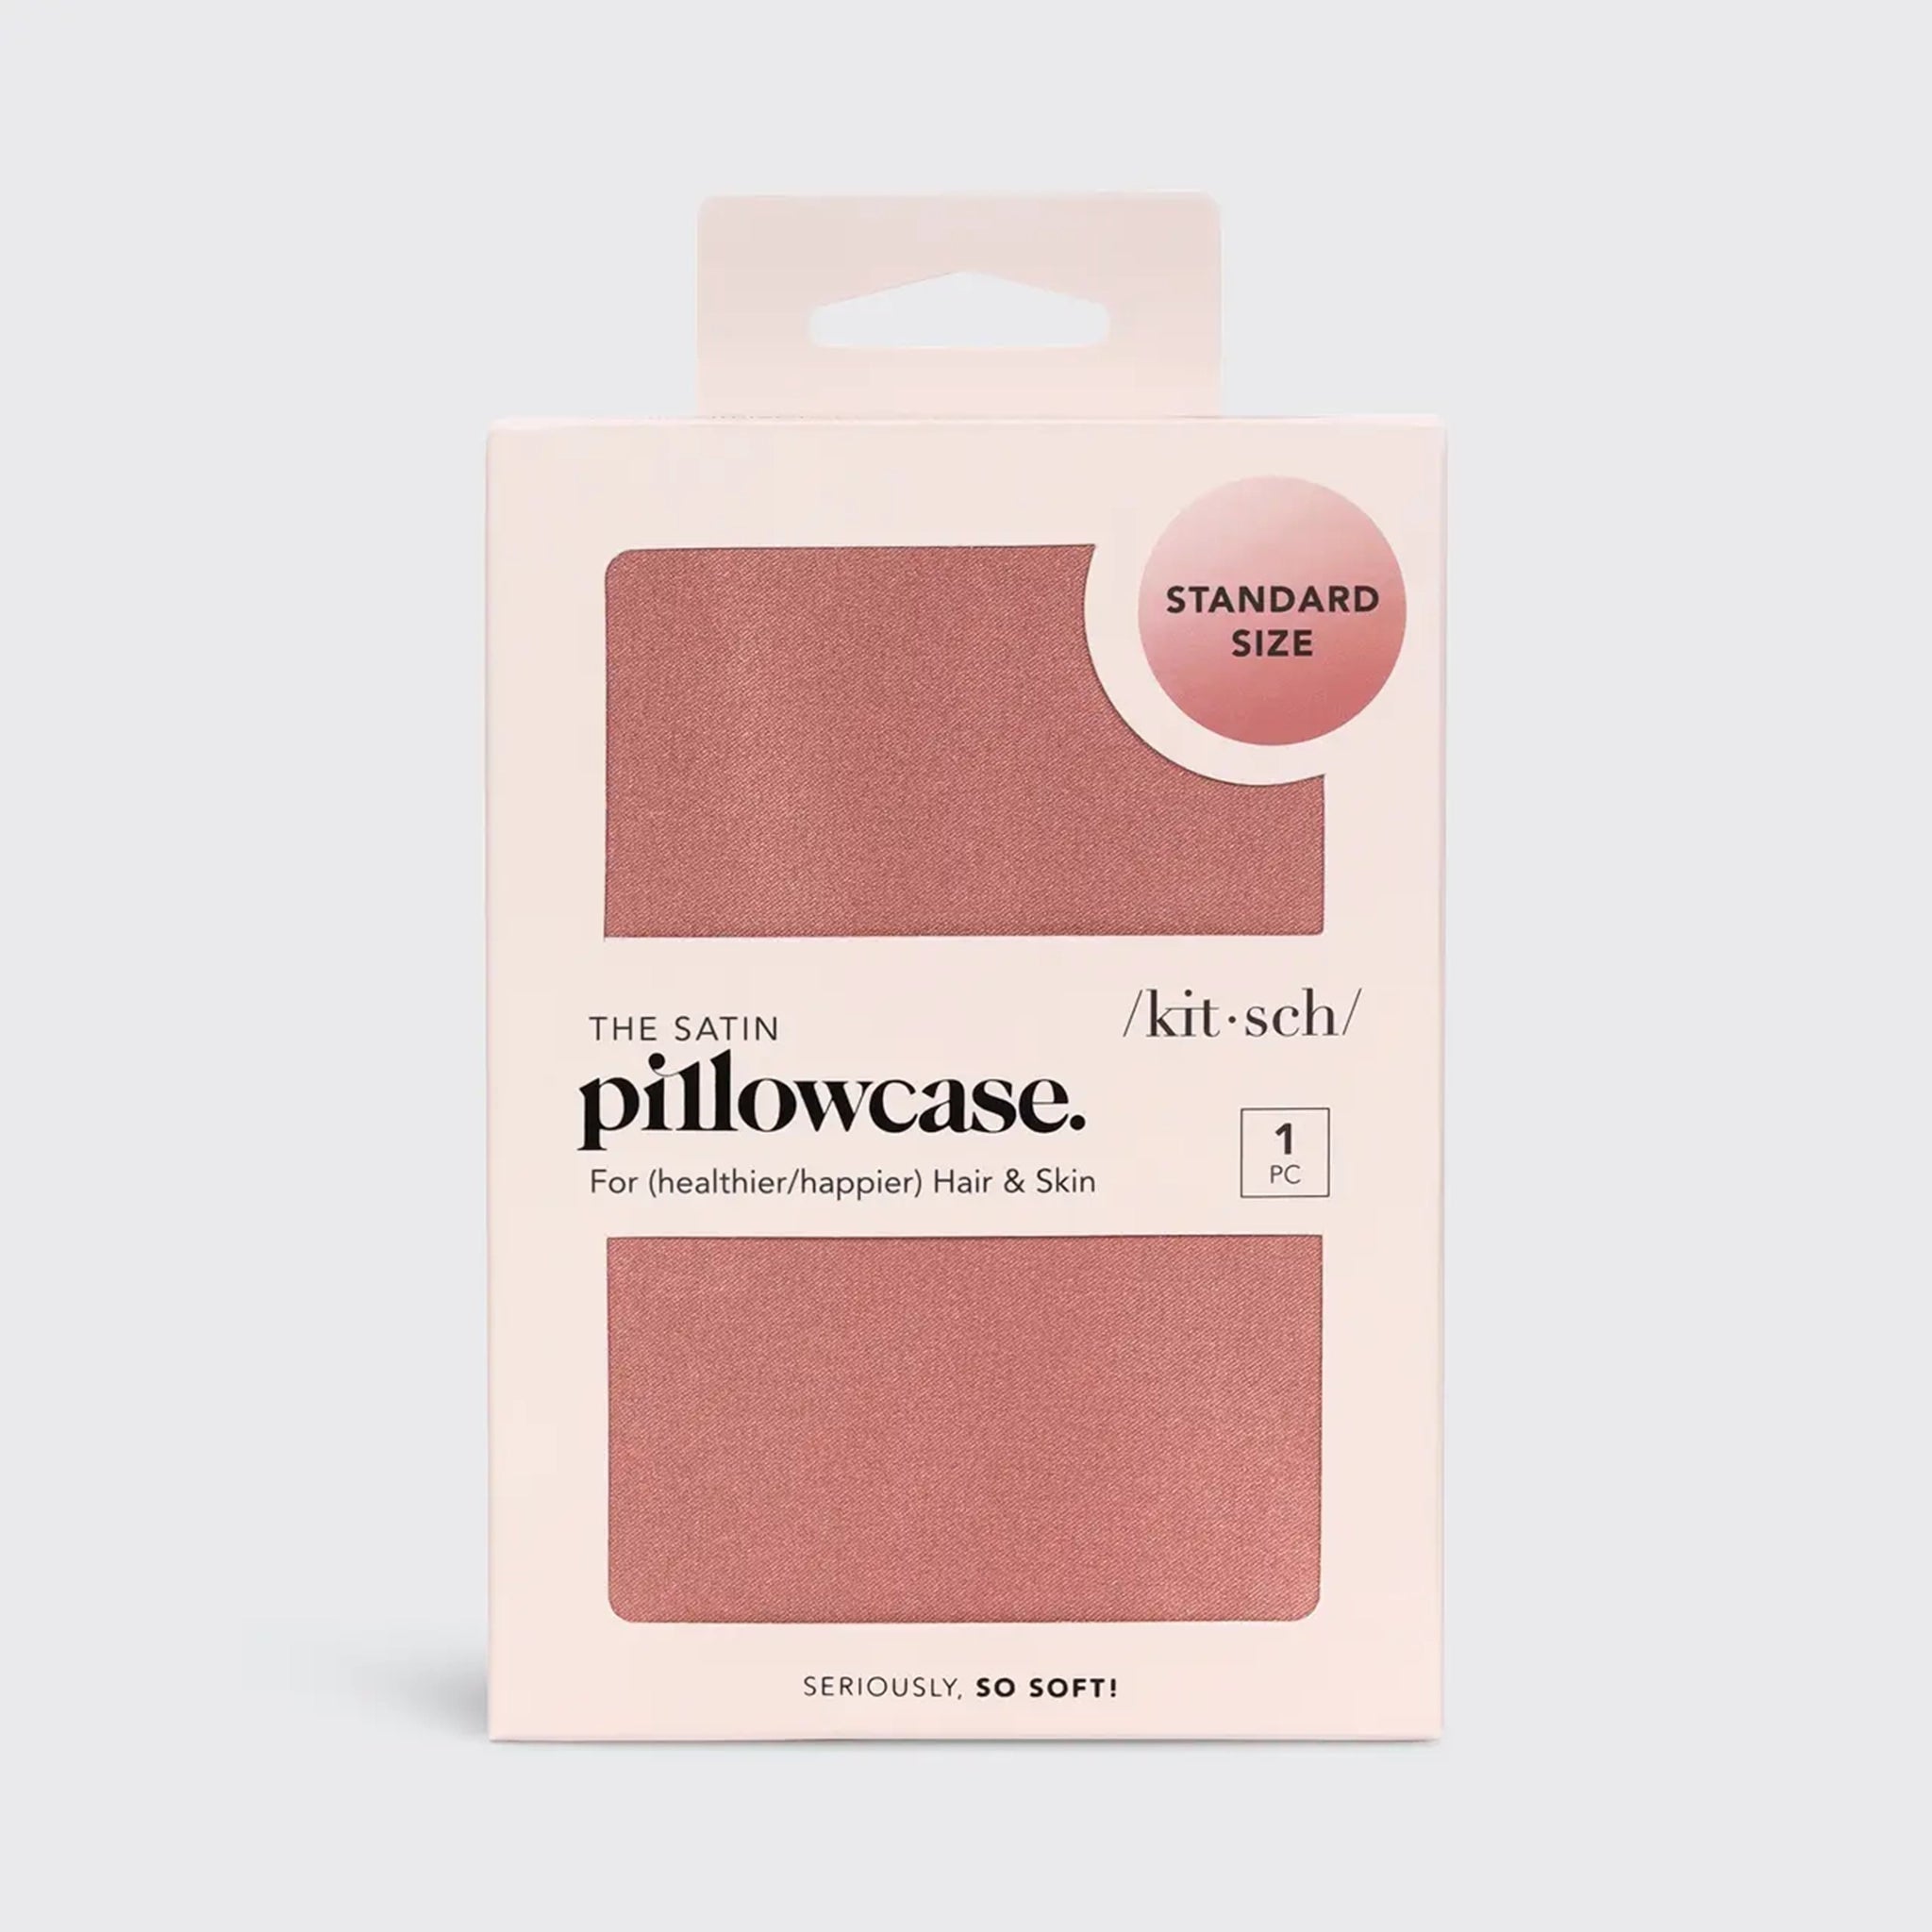 A rose pink/ terracotta satin pillow case folded up in its pink packaging  along with text that reads, "Standard Size" "The Satin Pillowcase For (healthier/happier) Hair & Skin" "1 PC".